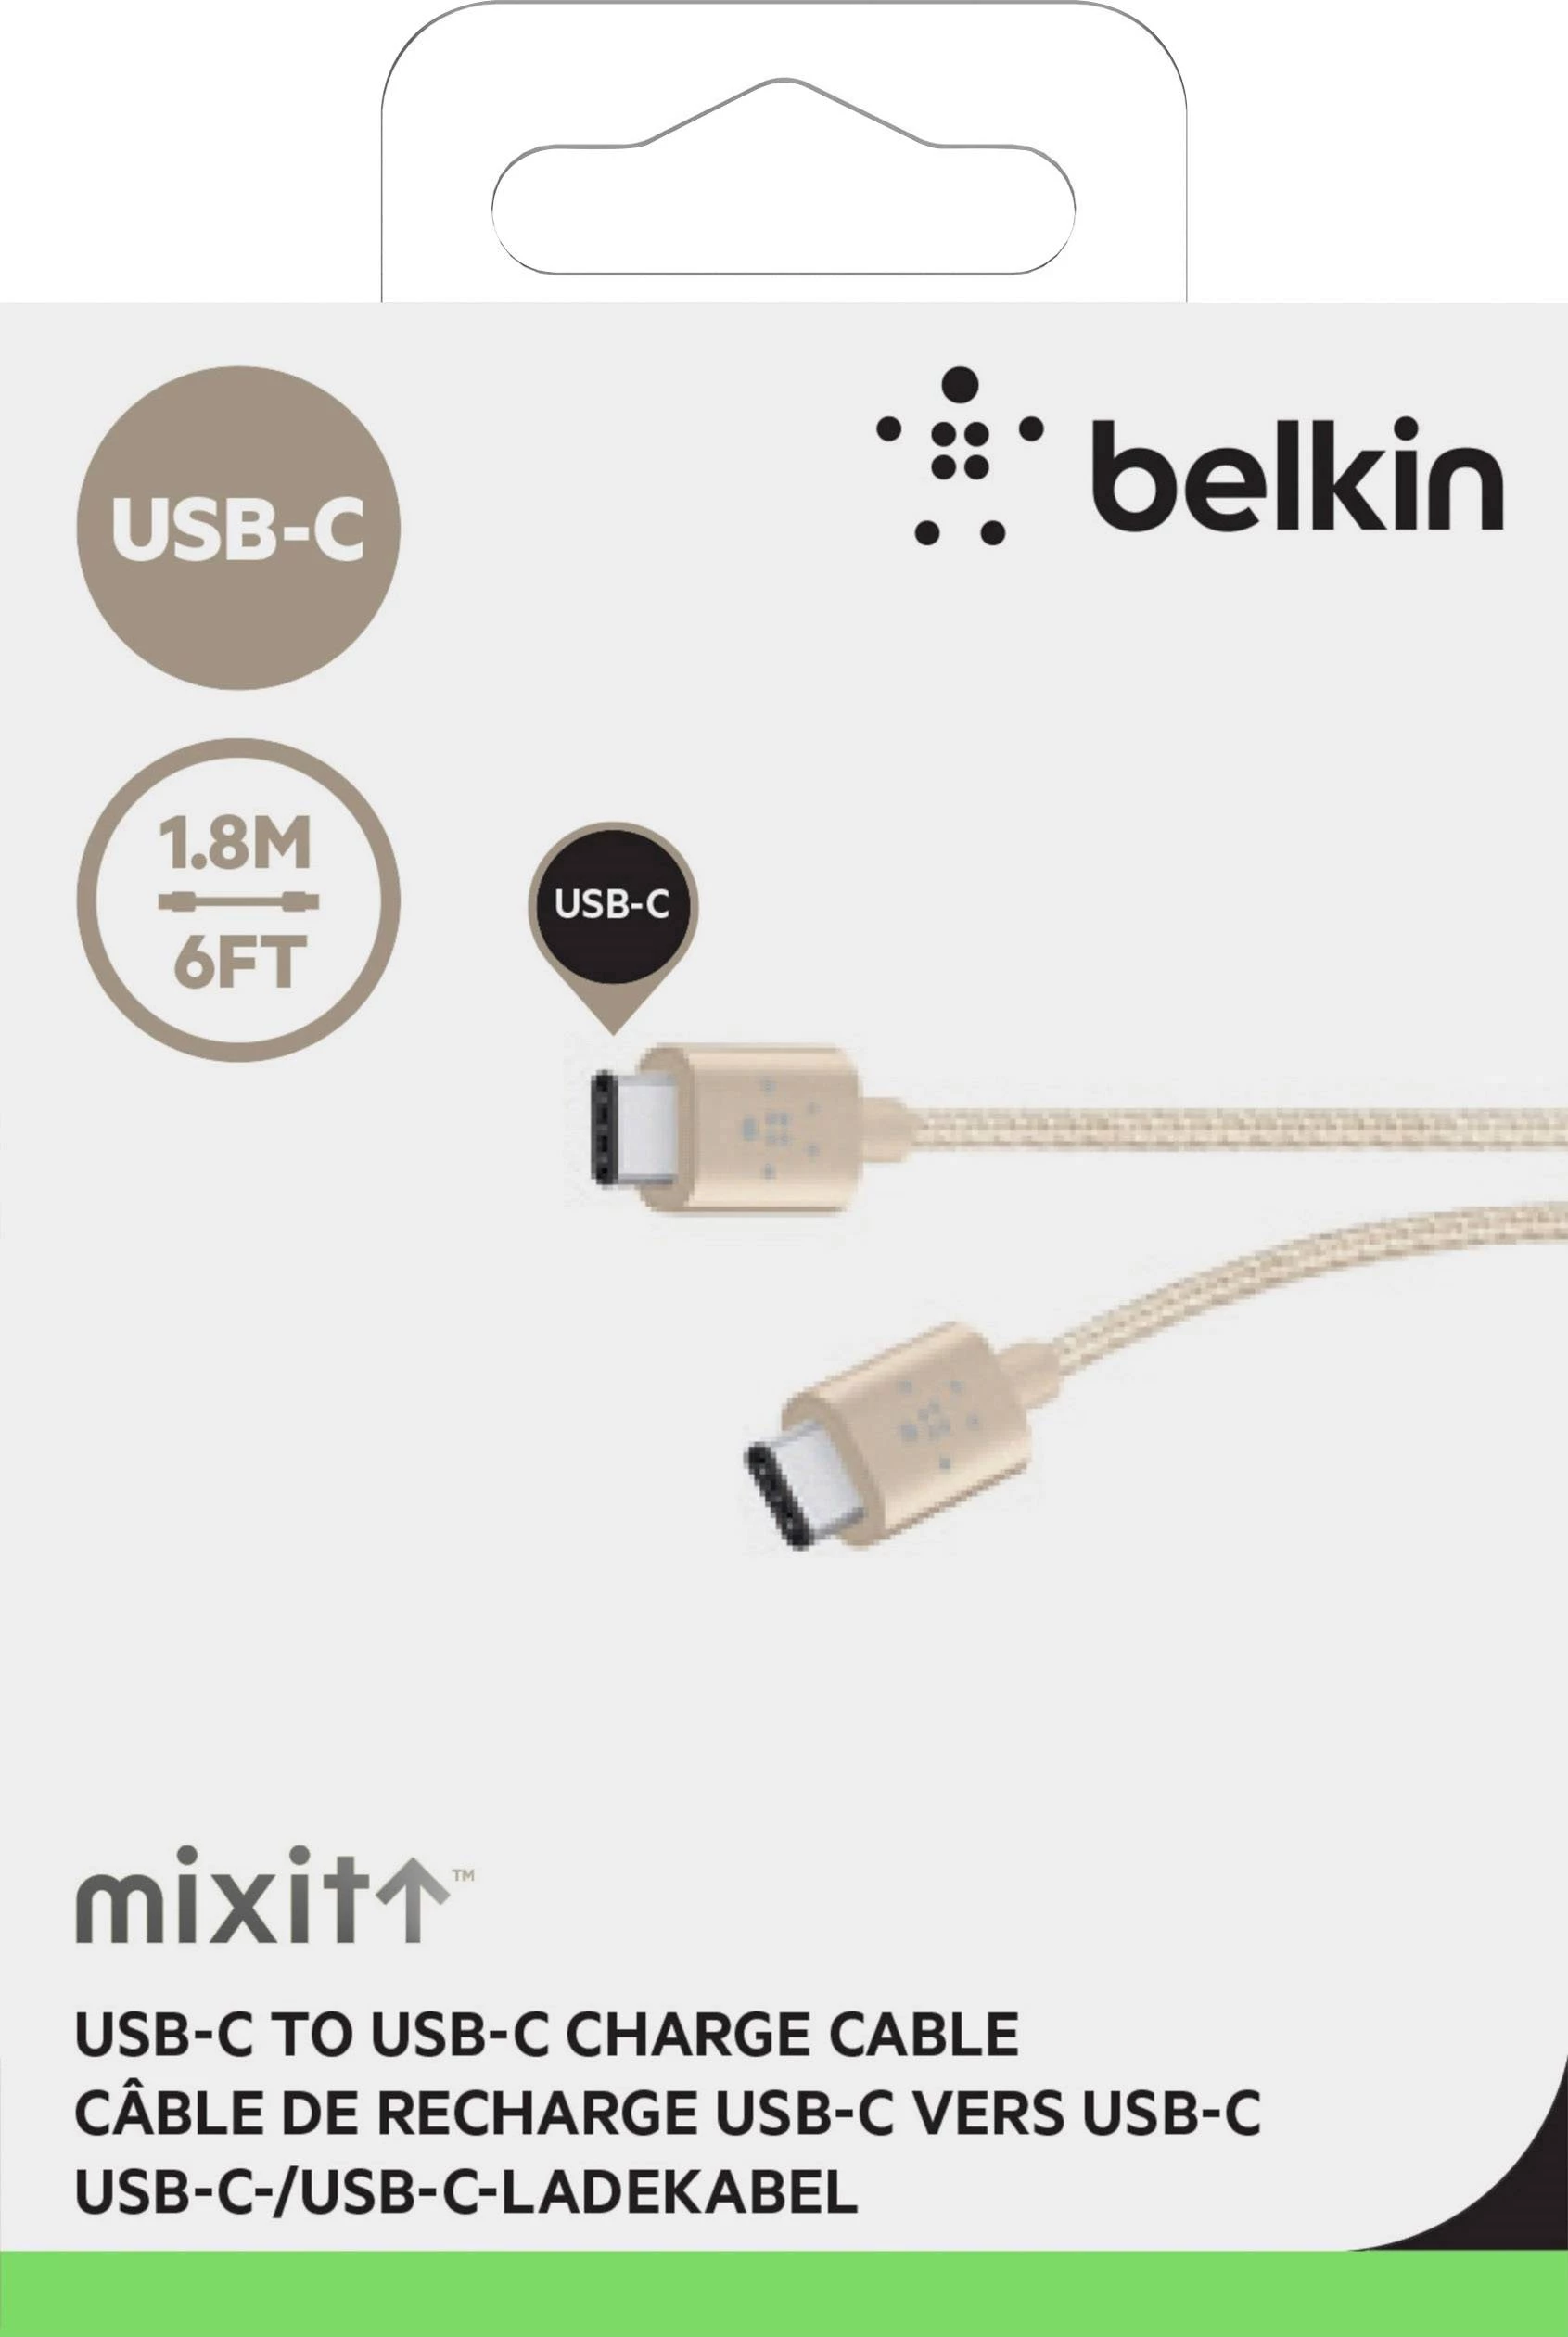 Belkin MIXIT Metallic Type-C to Type-C Charge Cable 1.8m (Gold) #F2CU041bt06-GLD